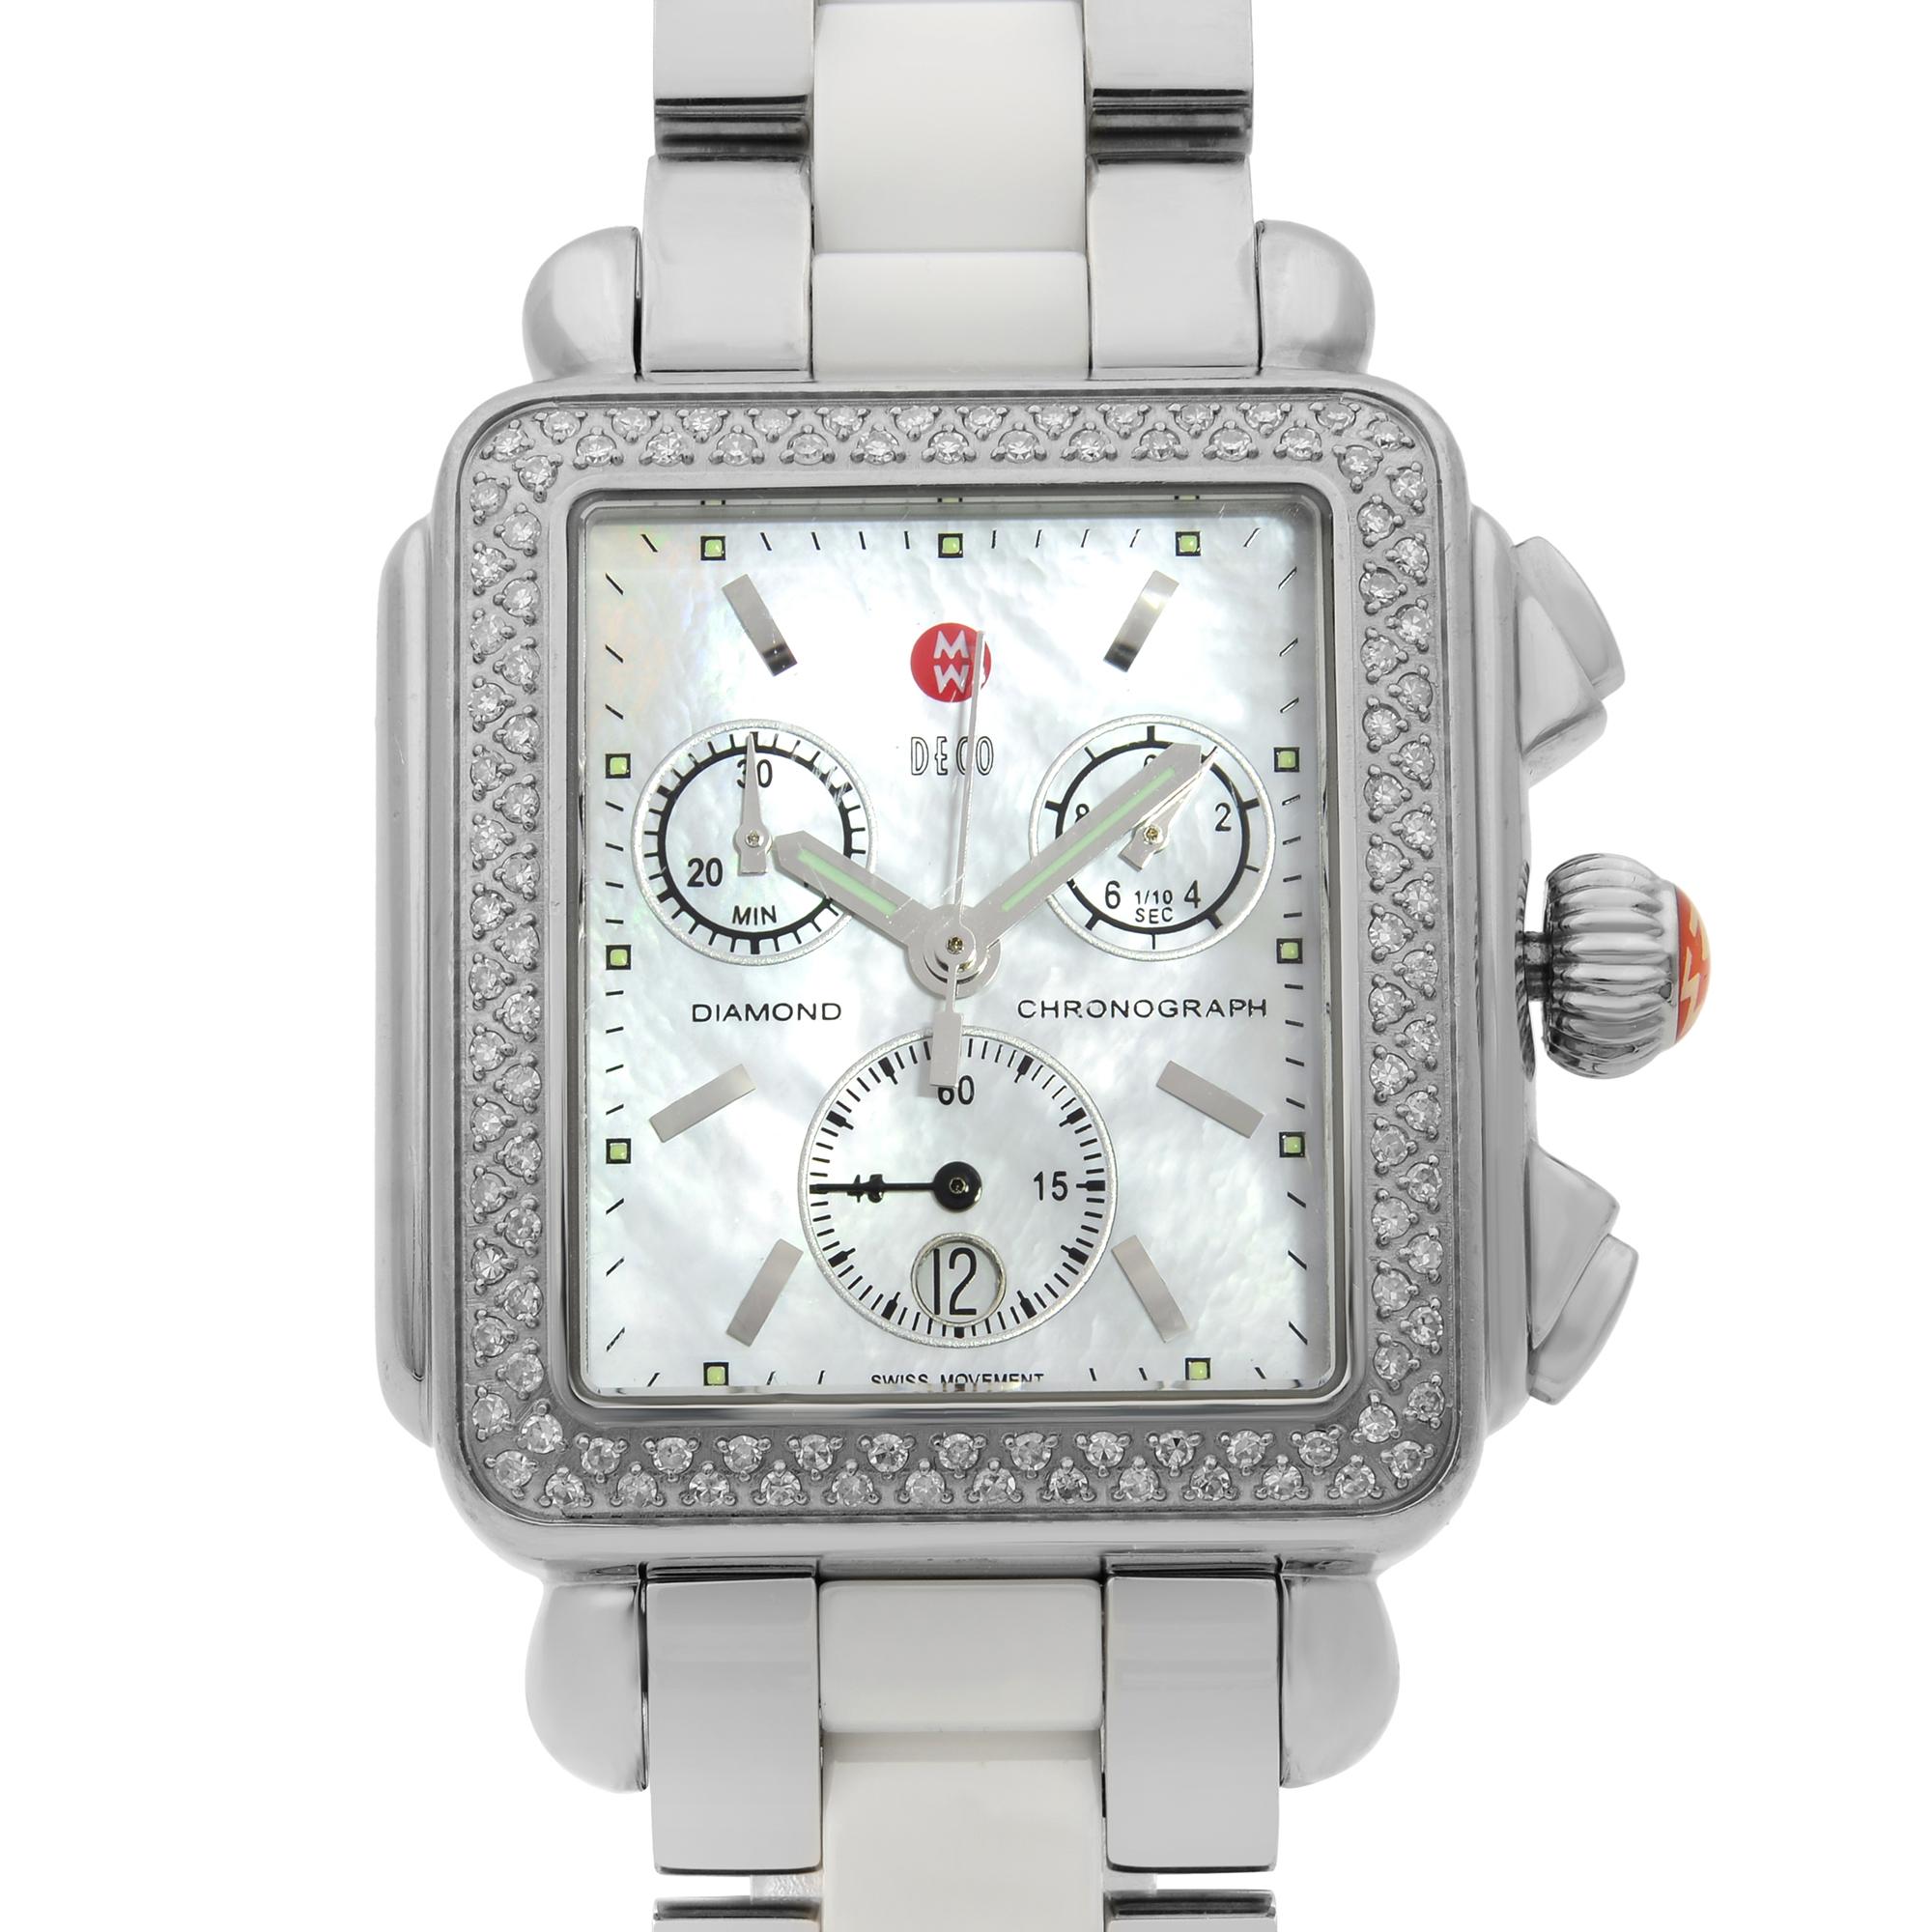 This pre-owned Michele Deco MWW06A000716 is a beautiful Ladie's timepiece that is powered by quartz (battery) movement which is cased in a stainless steel case. It has a  rectangle shape face, chronograph, date indicator, small seconds subdial dial